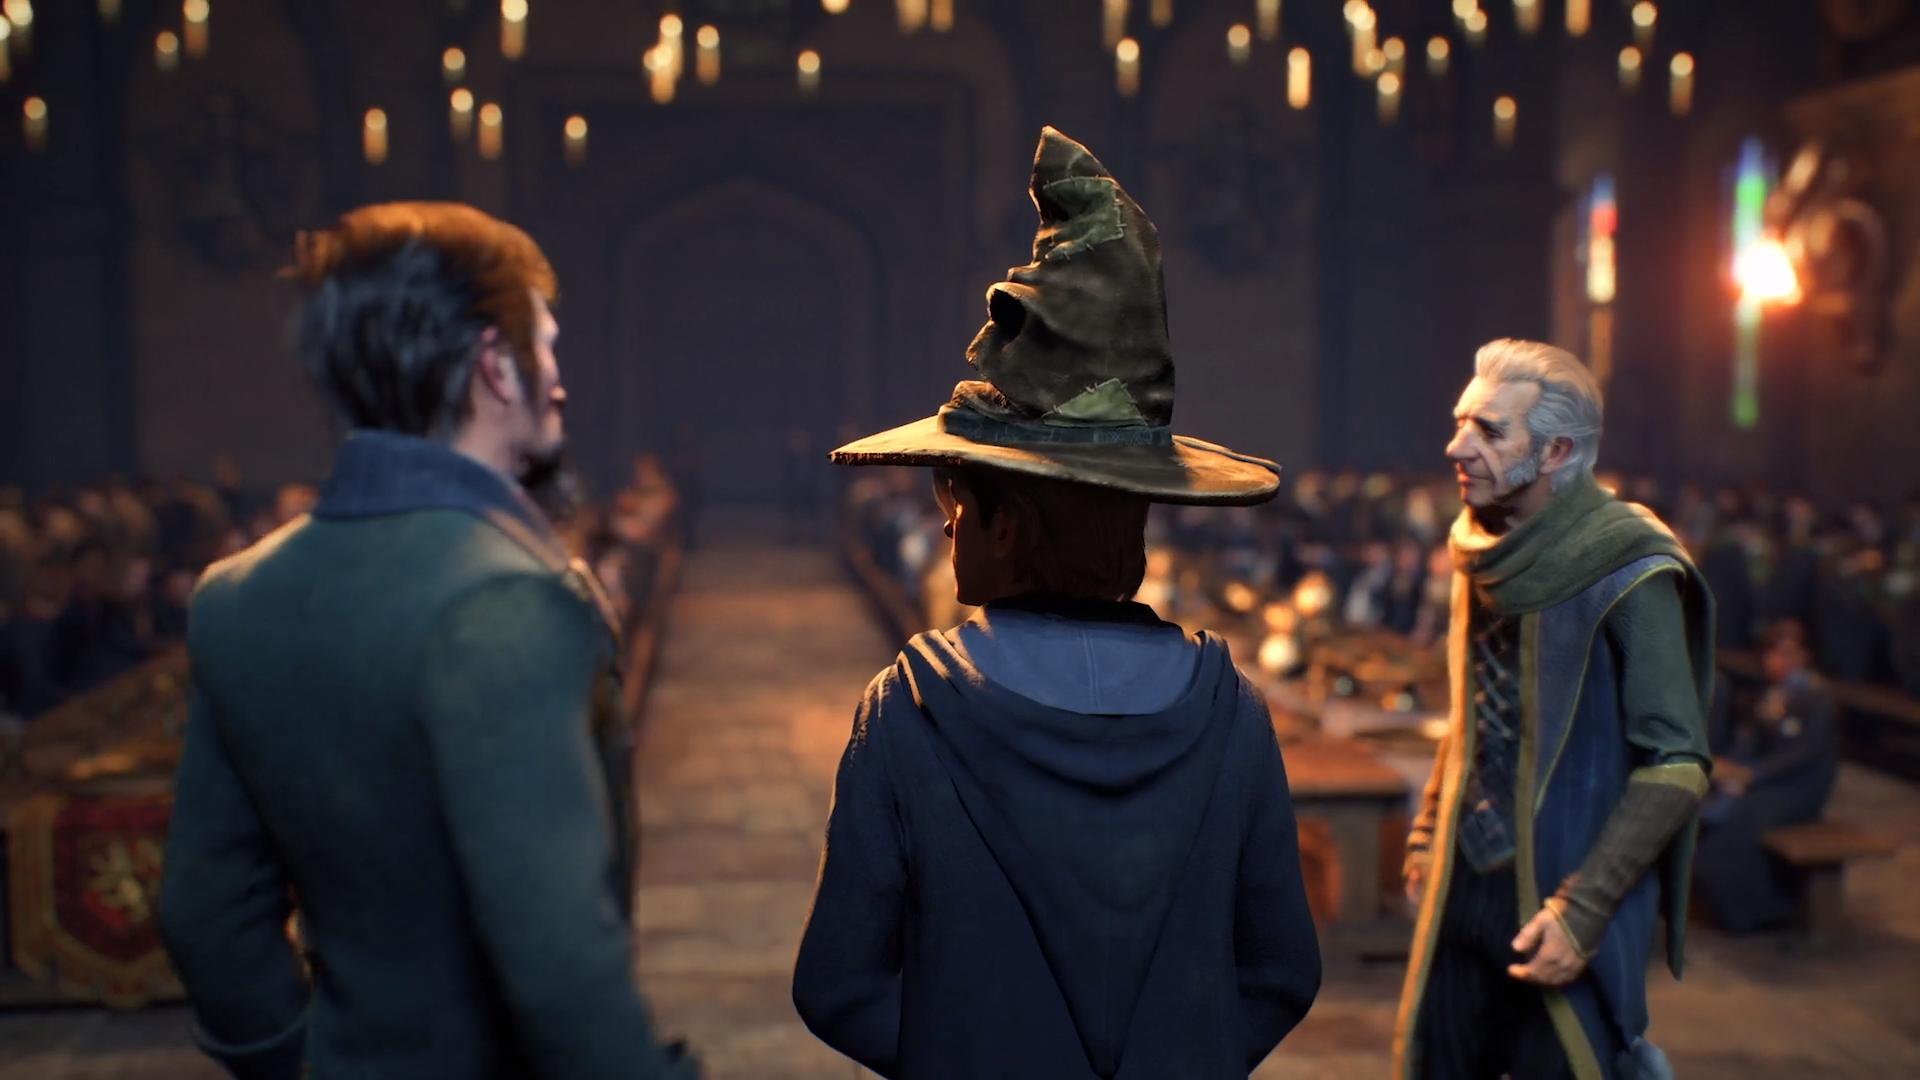 Hogwarts Legacy is an open world Harry Potter game coming to PS Xbox Series X, and PC